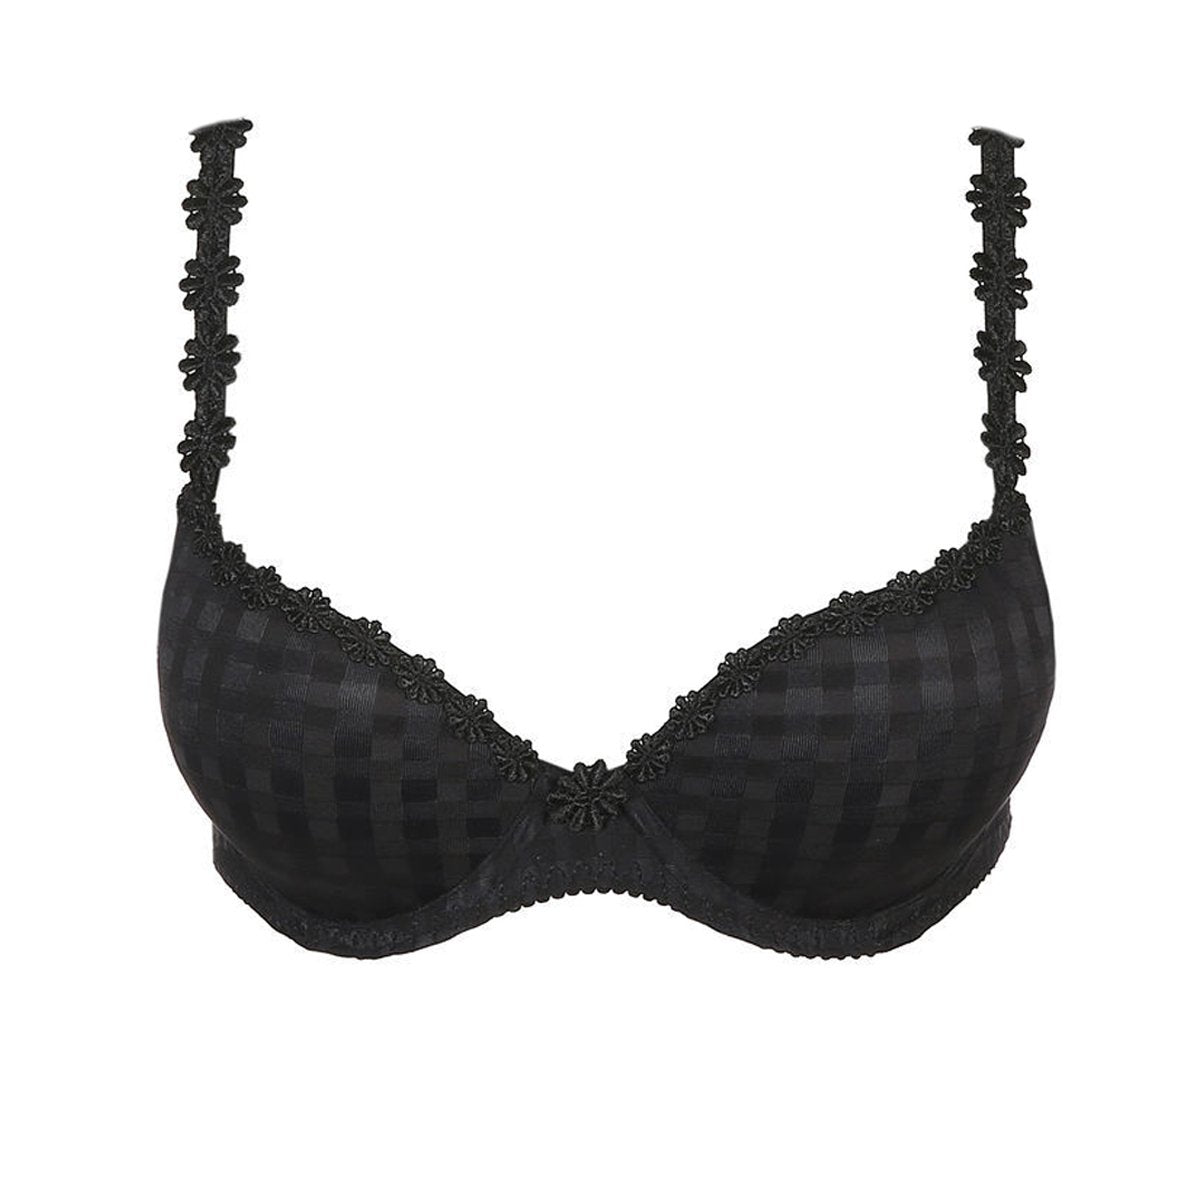 Dressberry Bra upto 90% off starting From Rs.260